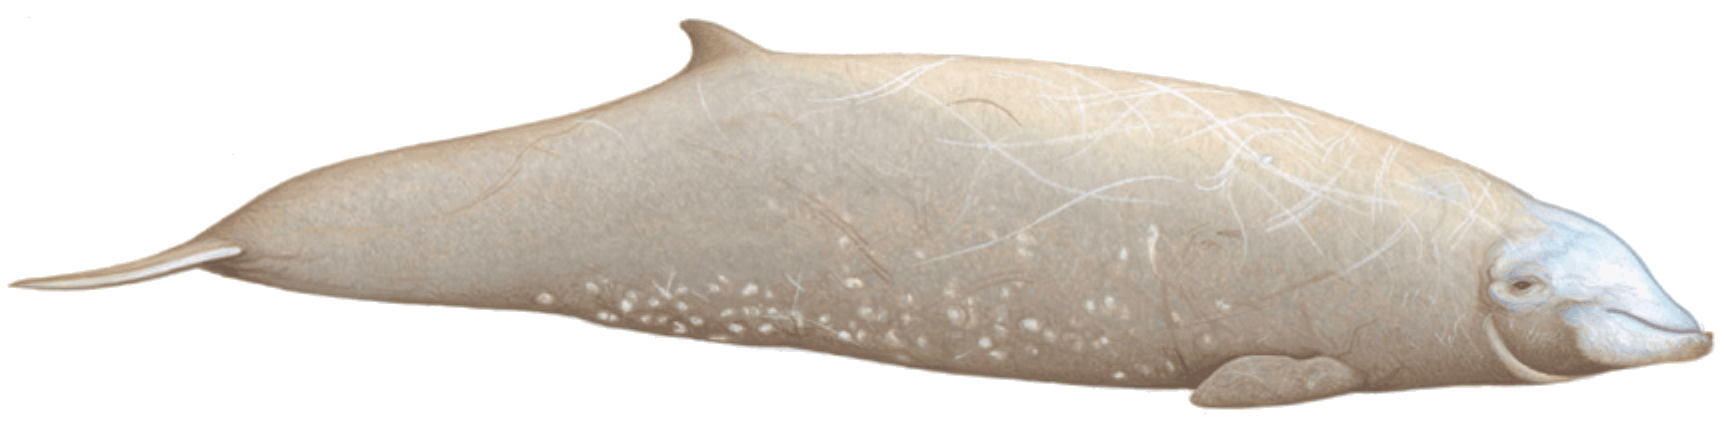 Cuvier's beaked whale illustration